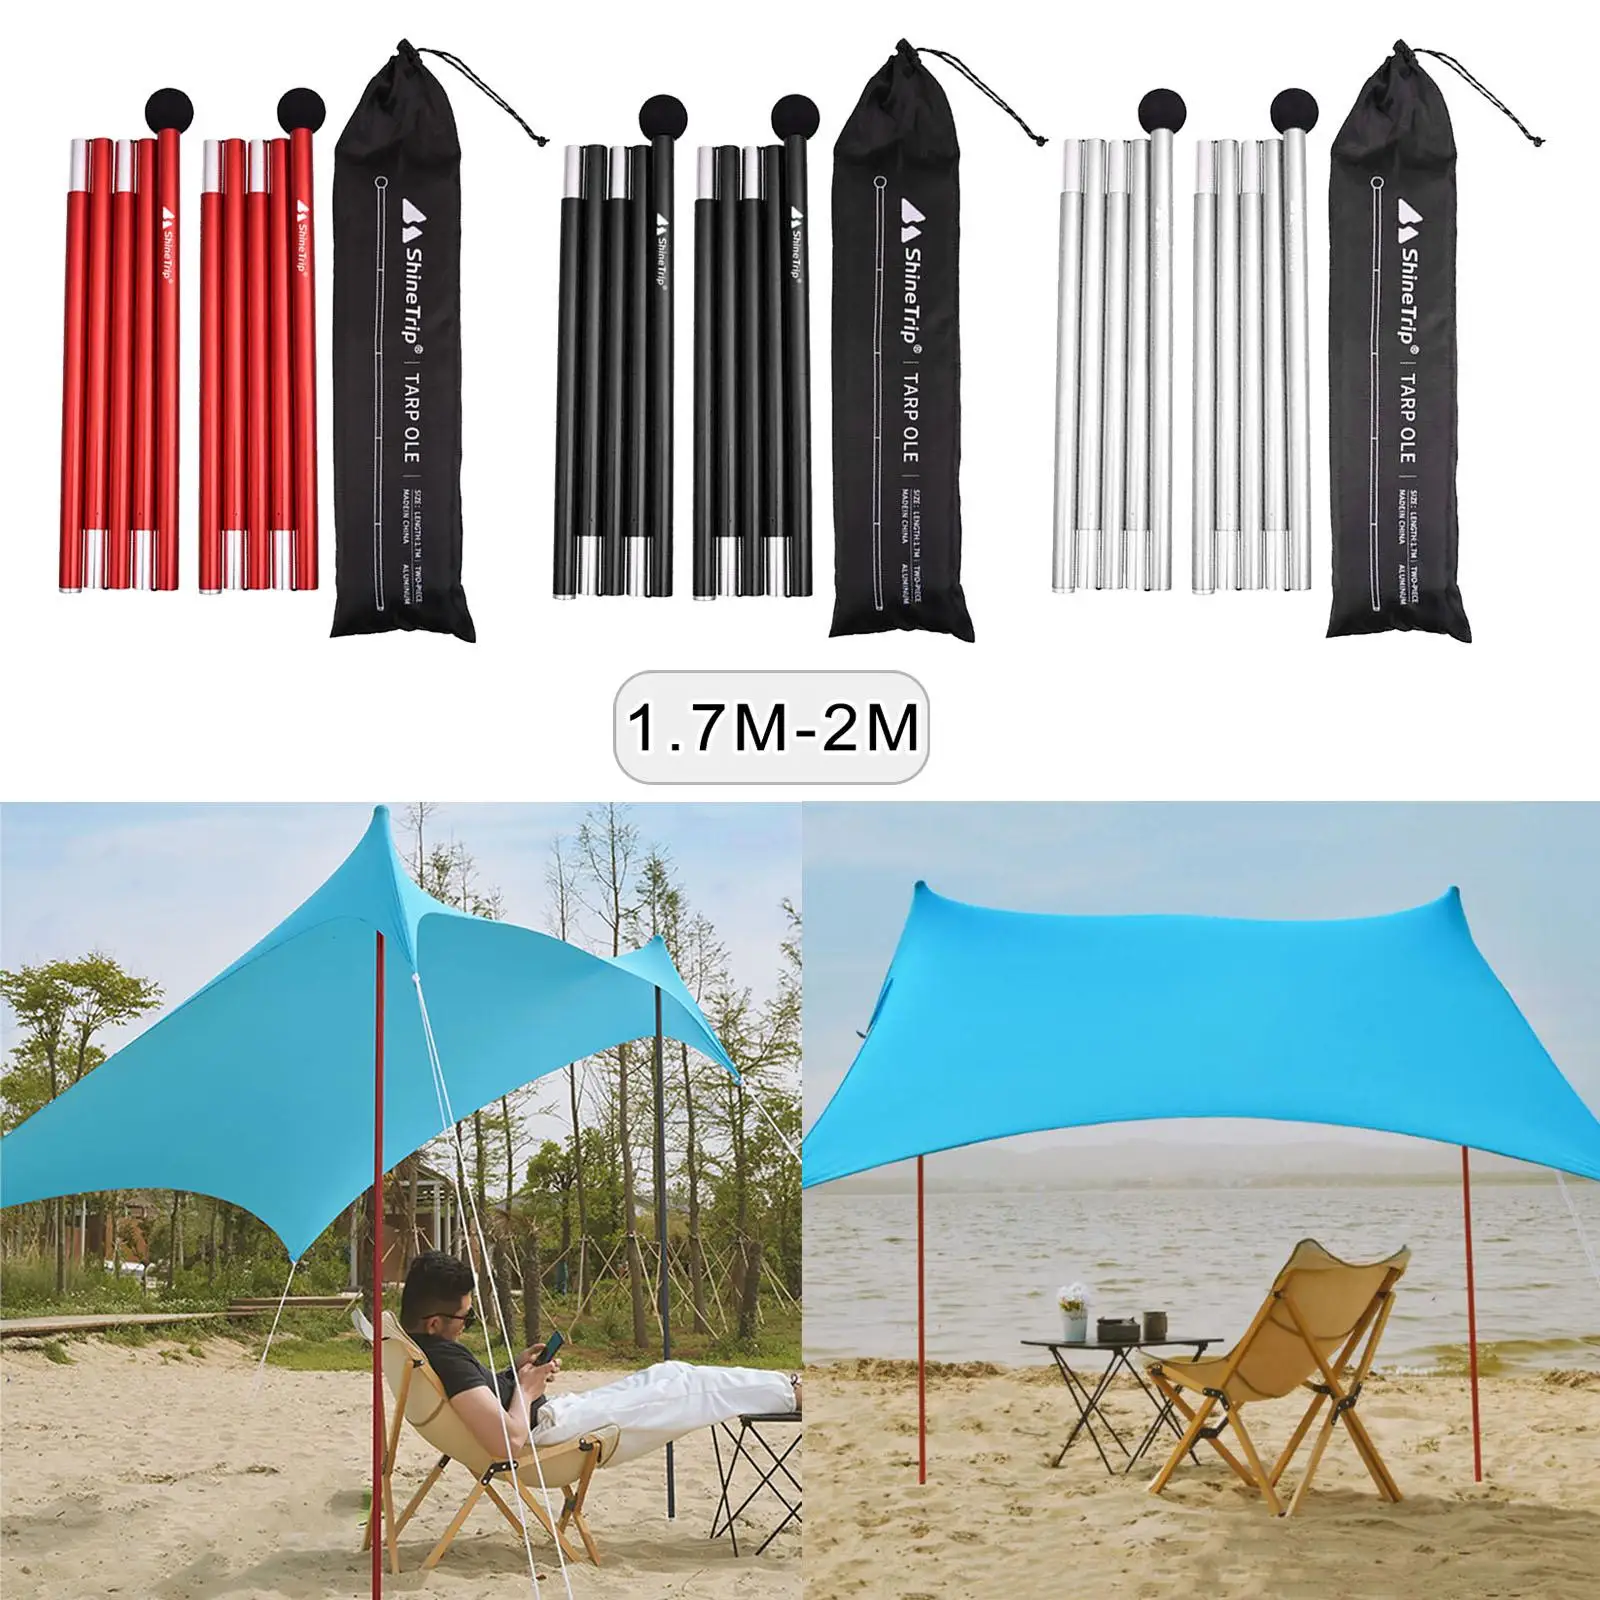 

2pcs Telescoping Tarp Poles Tent Rods Adjustable Awning Canopy Tarp Support Pole Folding Tent Replacement Pole Rainfly RODS